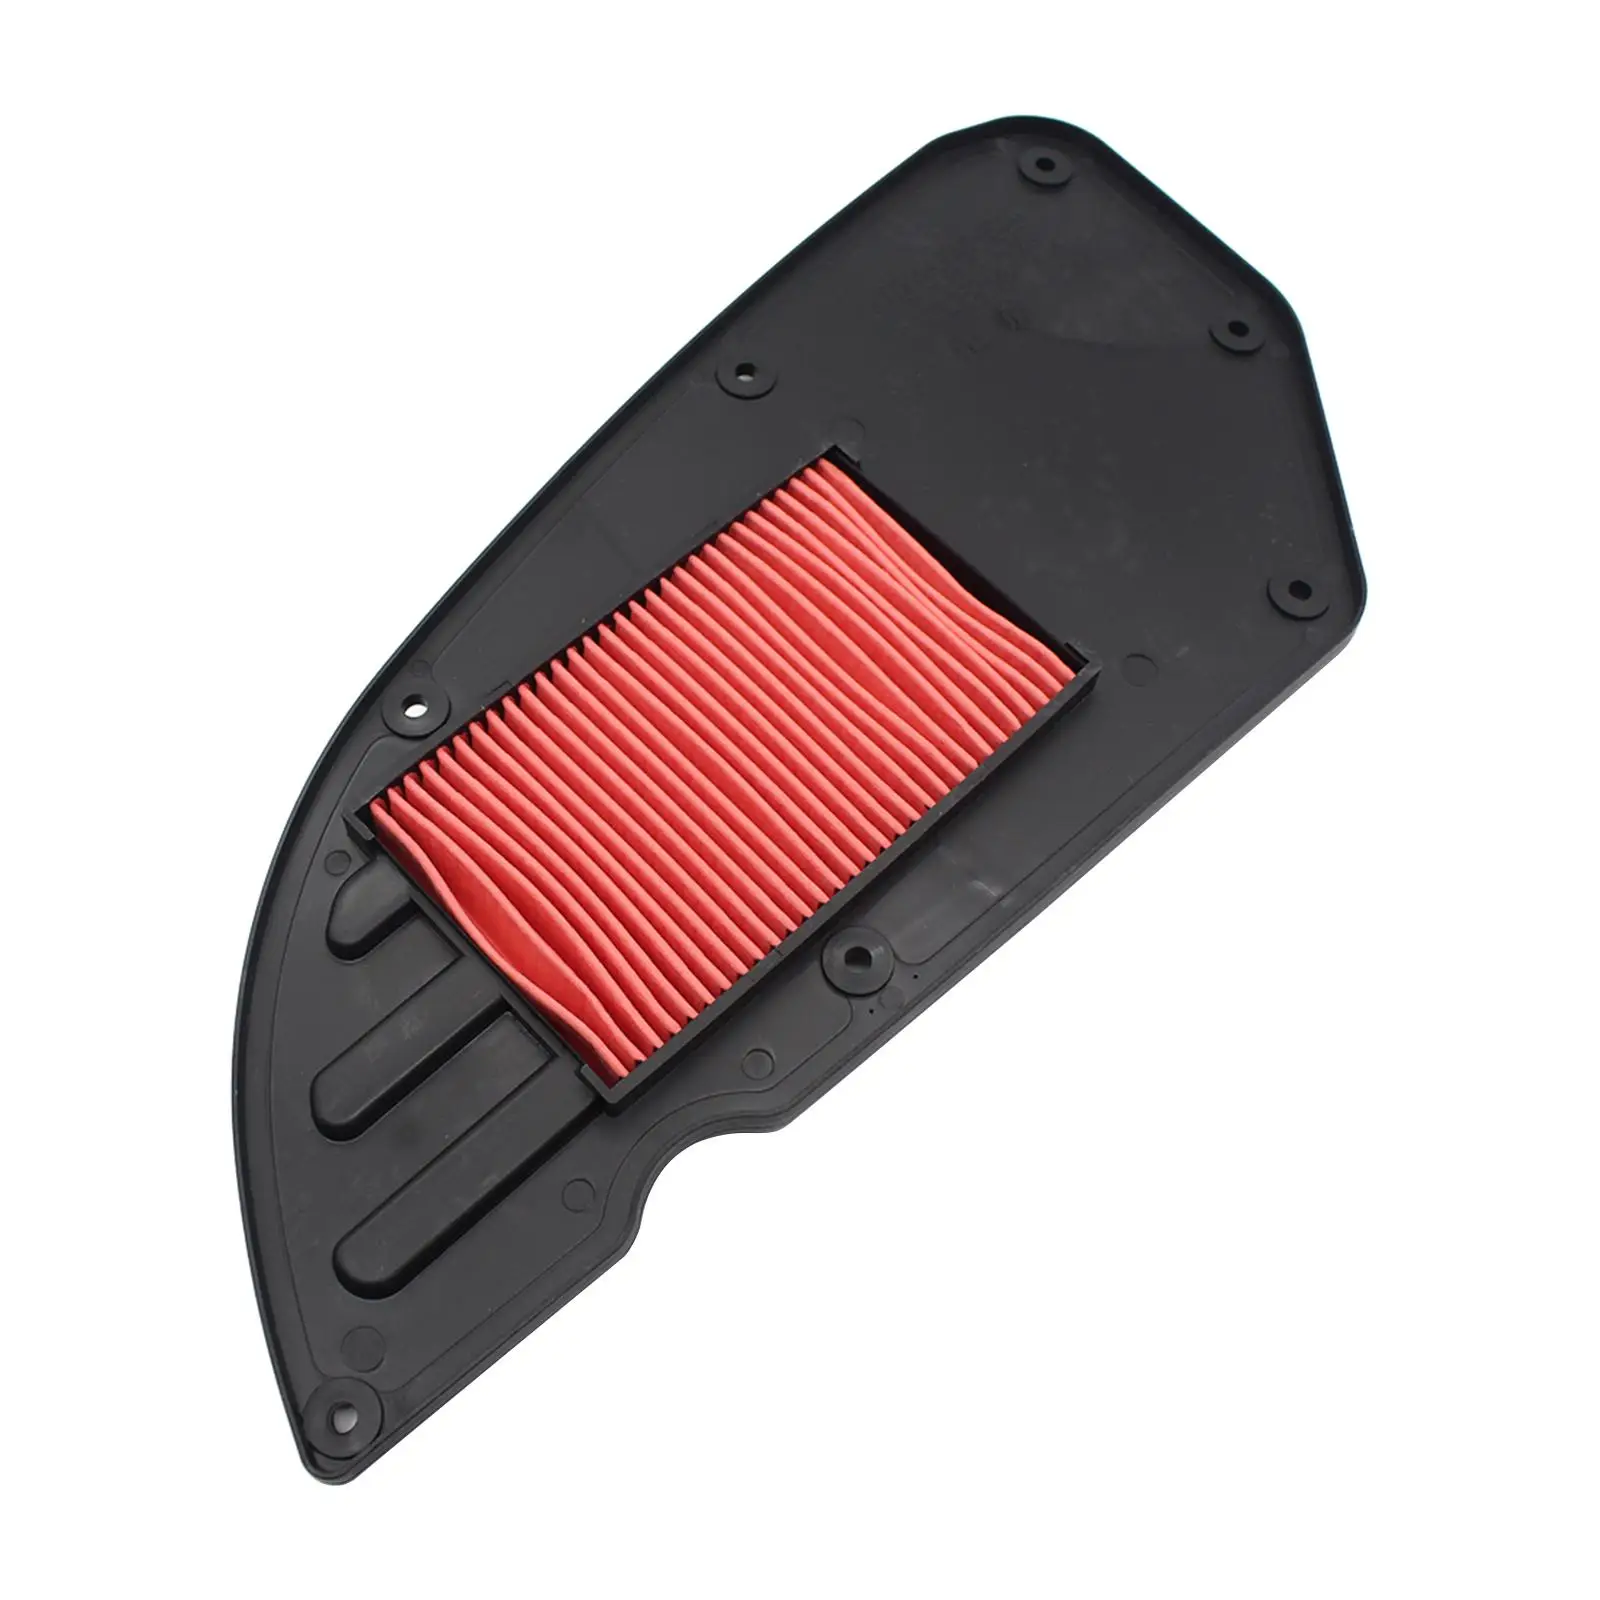 Motorcycle Air Filter Cleaner for Kymco Downtown 300 300i 2009- 16 17211-Lkg7-E00 Replacement Accessories Parts